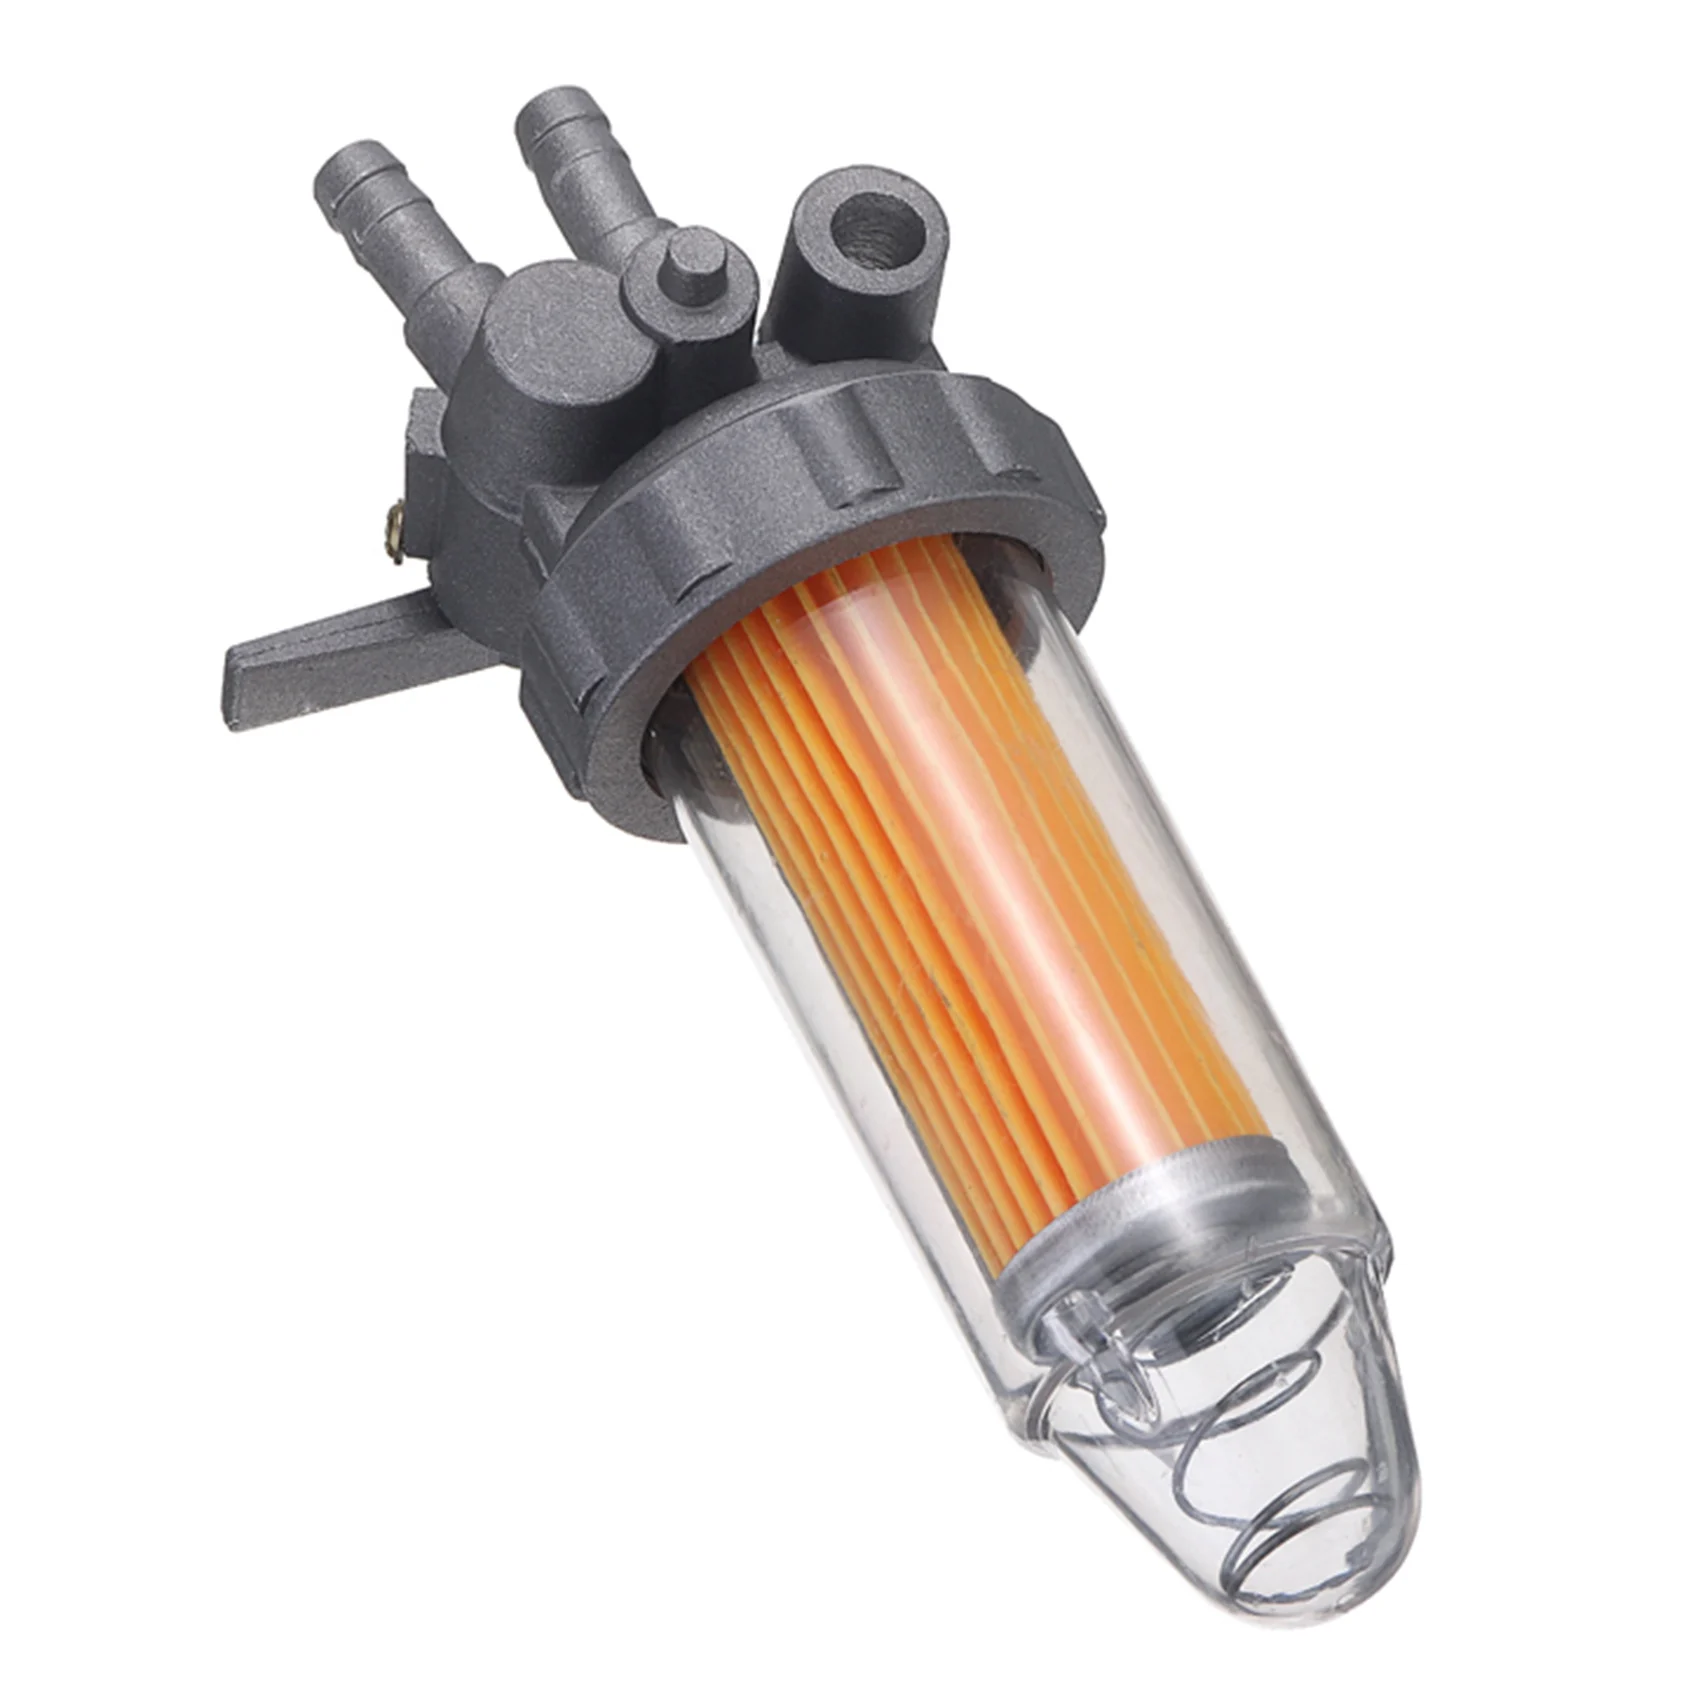 

Car Oil Fuel Filter Shut Off Valve Generator Automobile Filter Parts Accessories for 5KW 6KW 7KW 178F 186F 188F